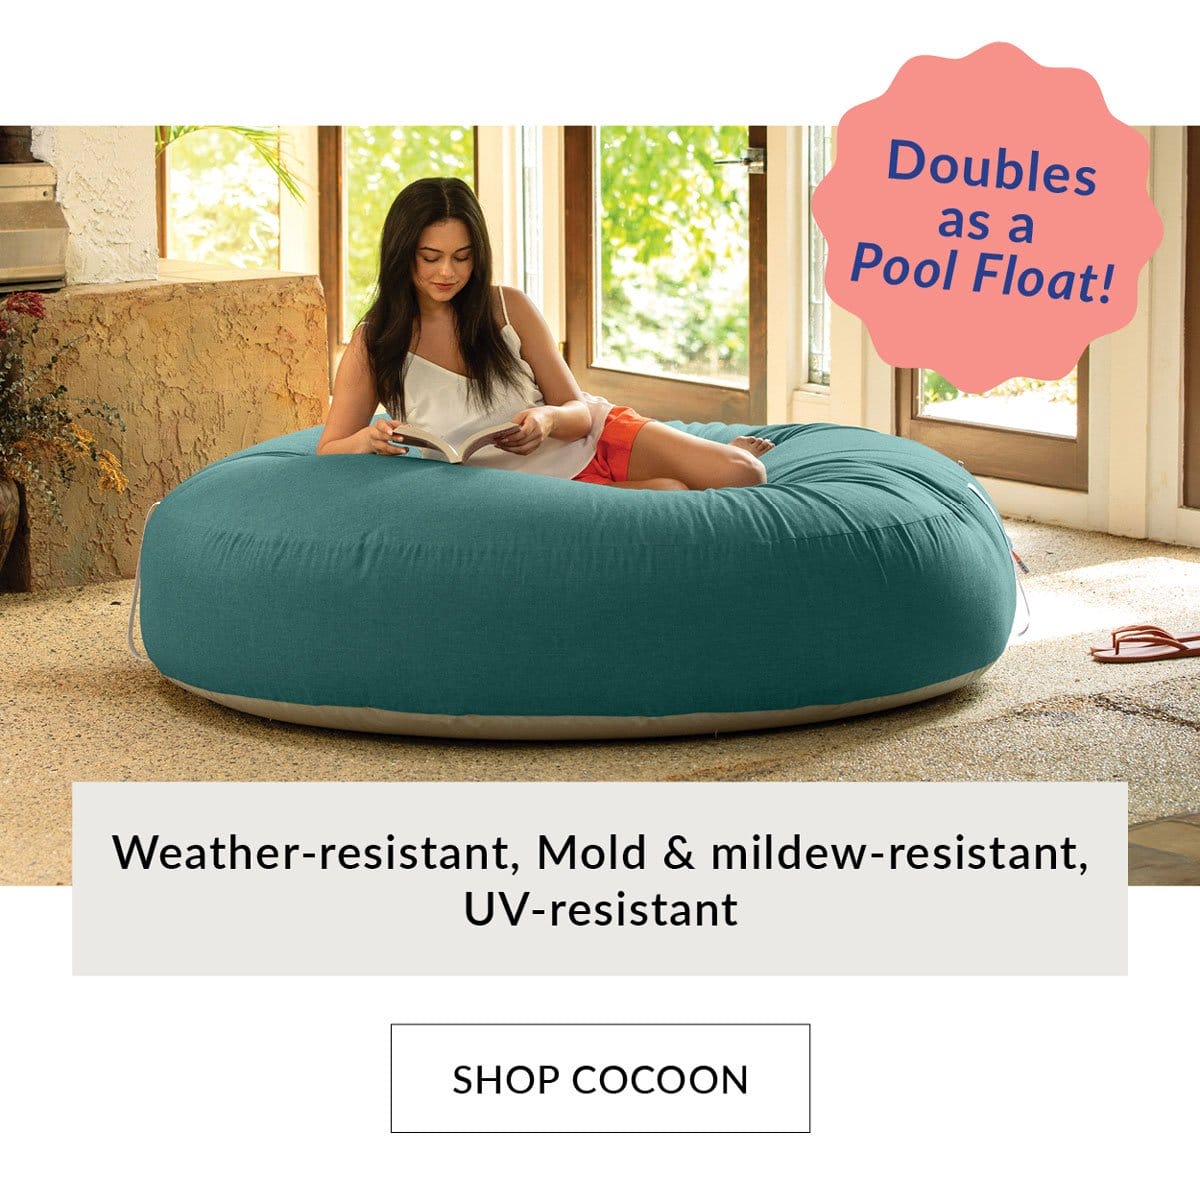 Weather-resistant, Mold & mildew-resistant, UV-resistant. Doubles as a pool float